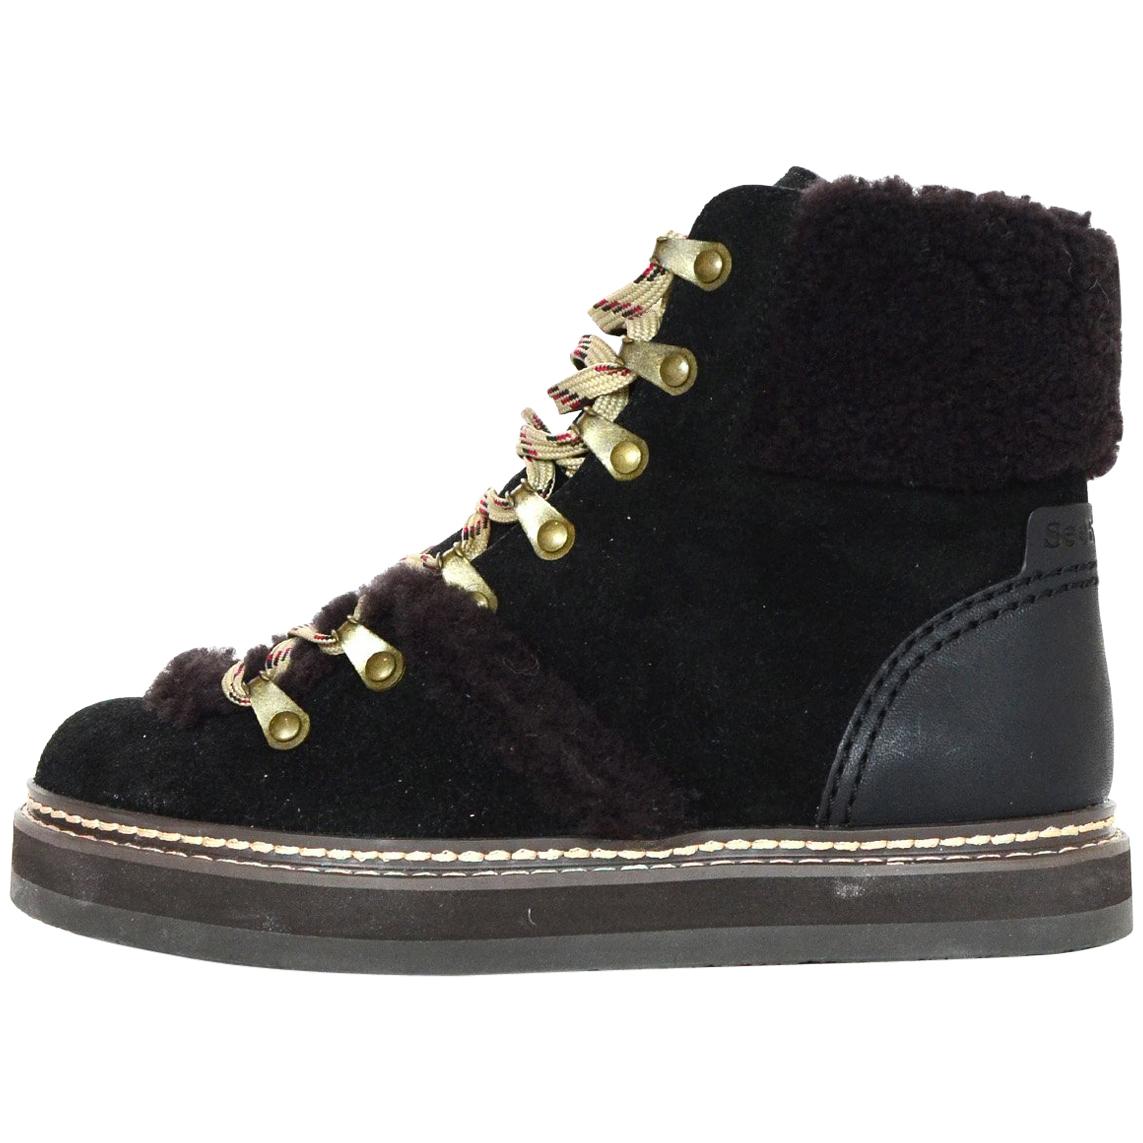 See By Chloe 2018 Shearling-Trimmed Suede Ankle Boots Sz 35 rt. $420